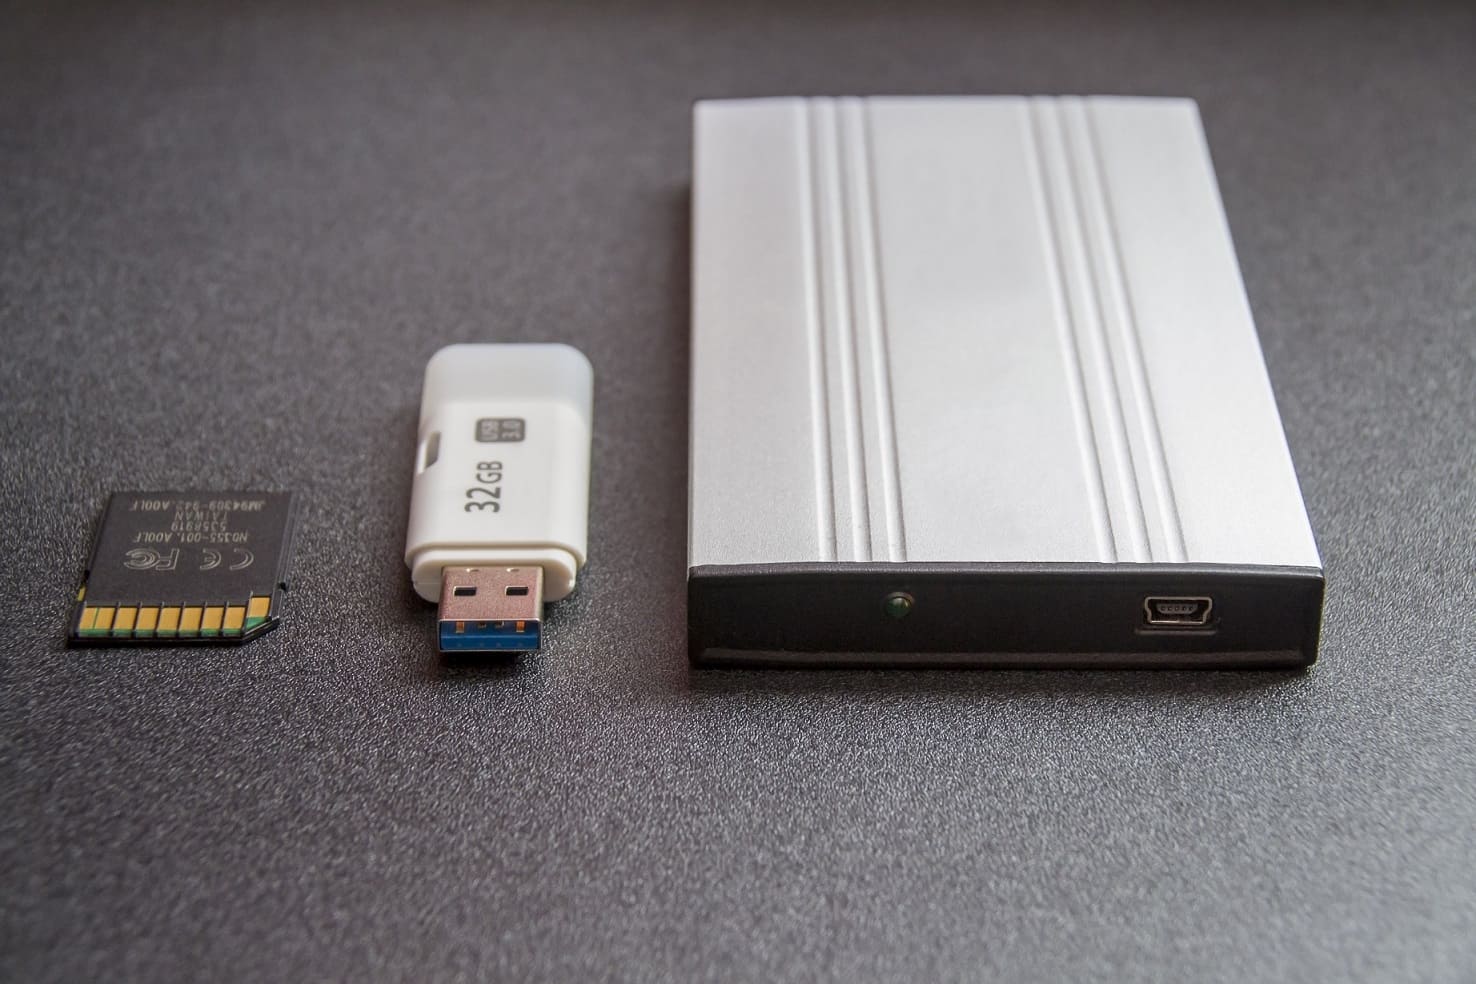 Before wiping or destroying your hard drive be sure to back everything up.